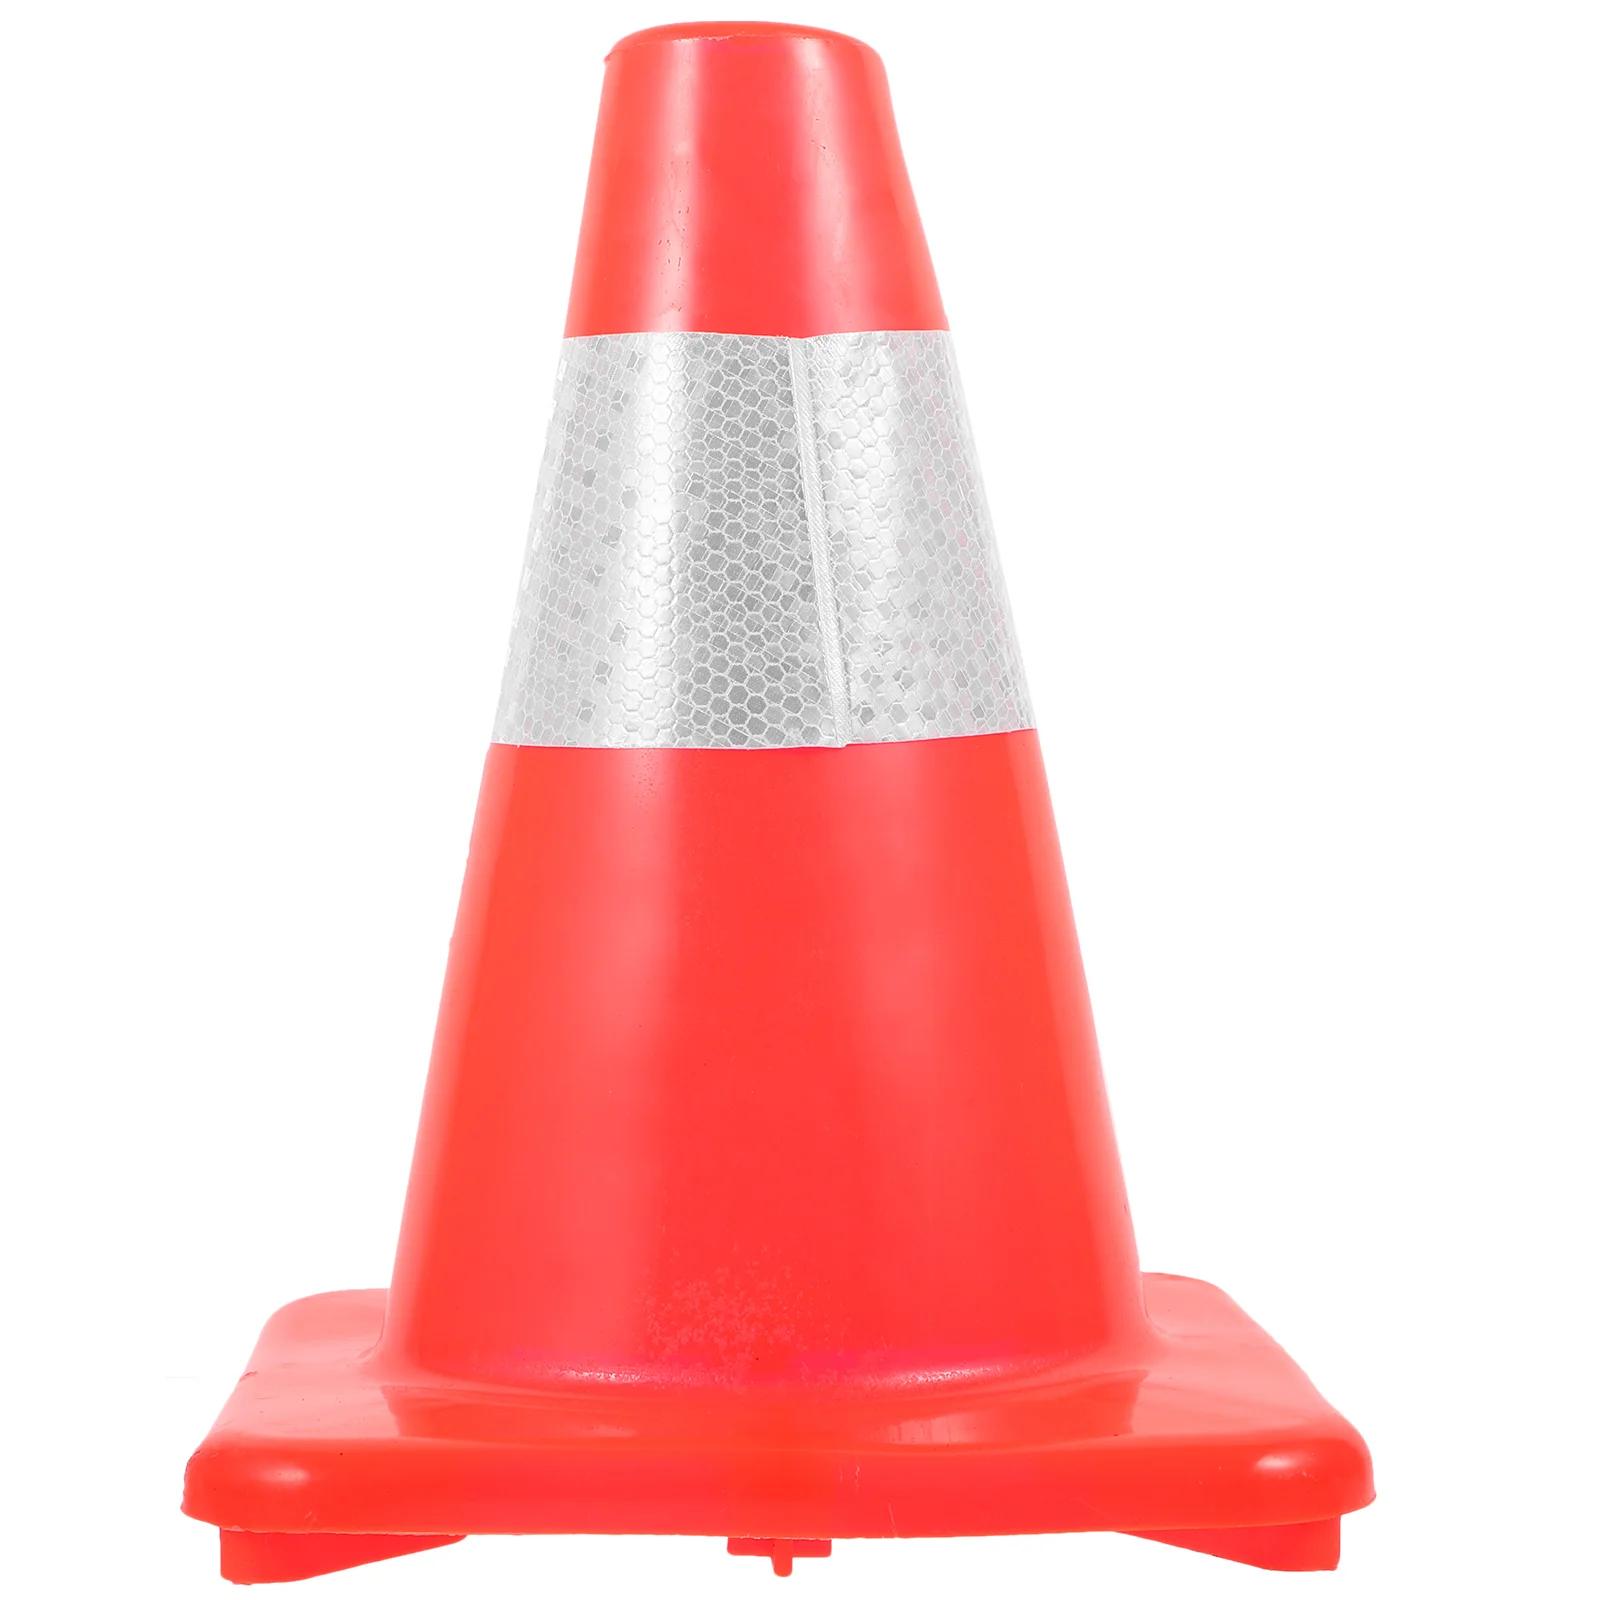 

Reflective Cone Driveway Traffic Construction Decorations Cones Parking Supply Training Large for Lot Soccer Balls